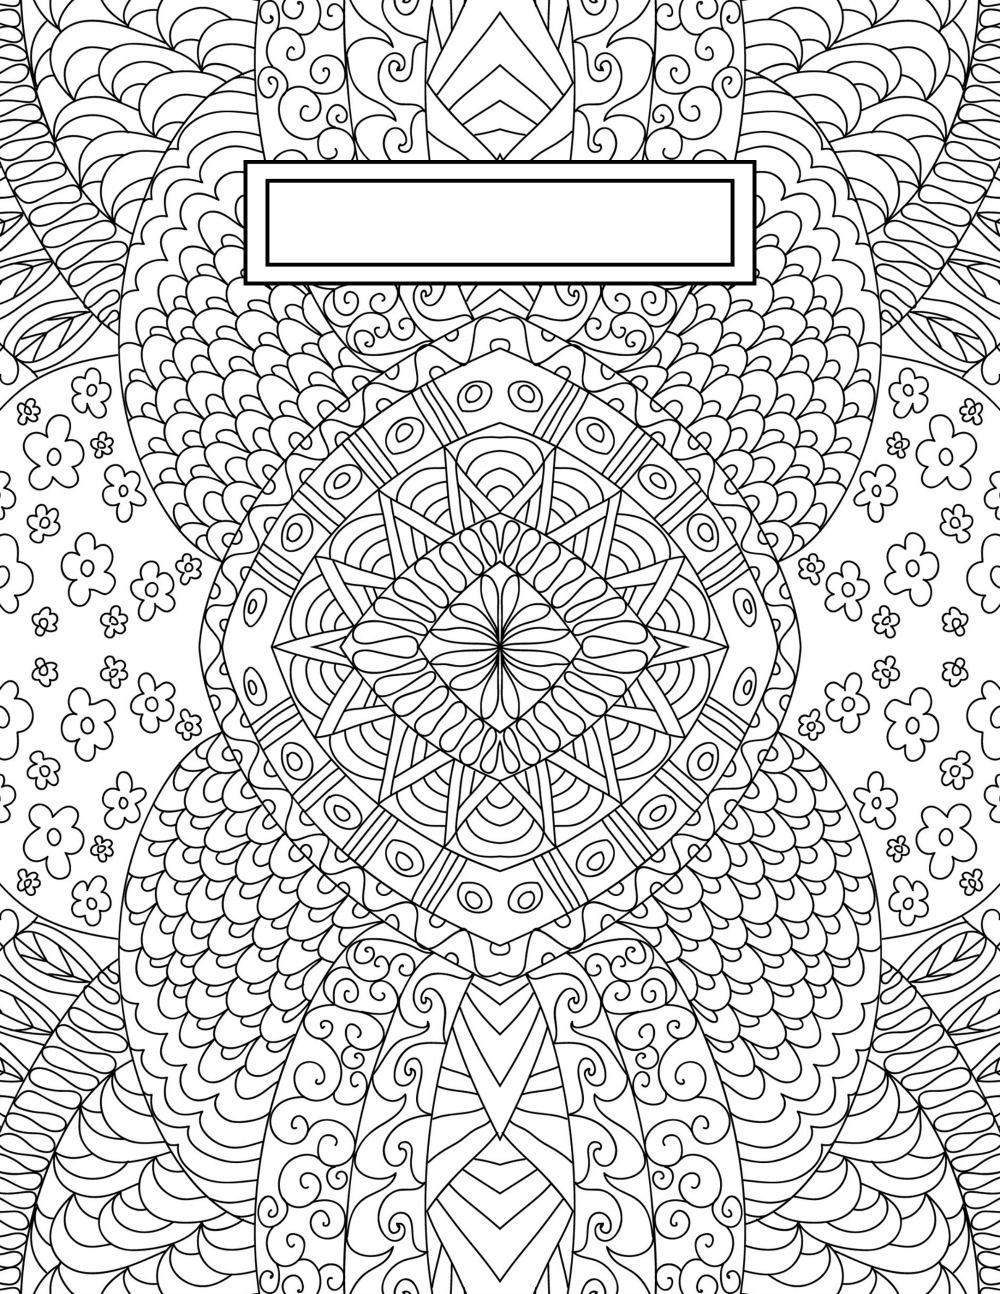 Back To School Binder Cover Adult Coloring Pages | Bullet Journaling - Free Printable Binder Covers To Color